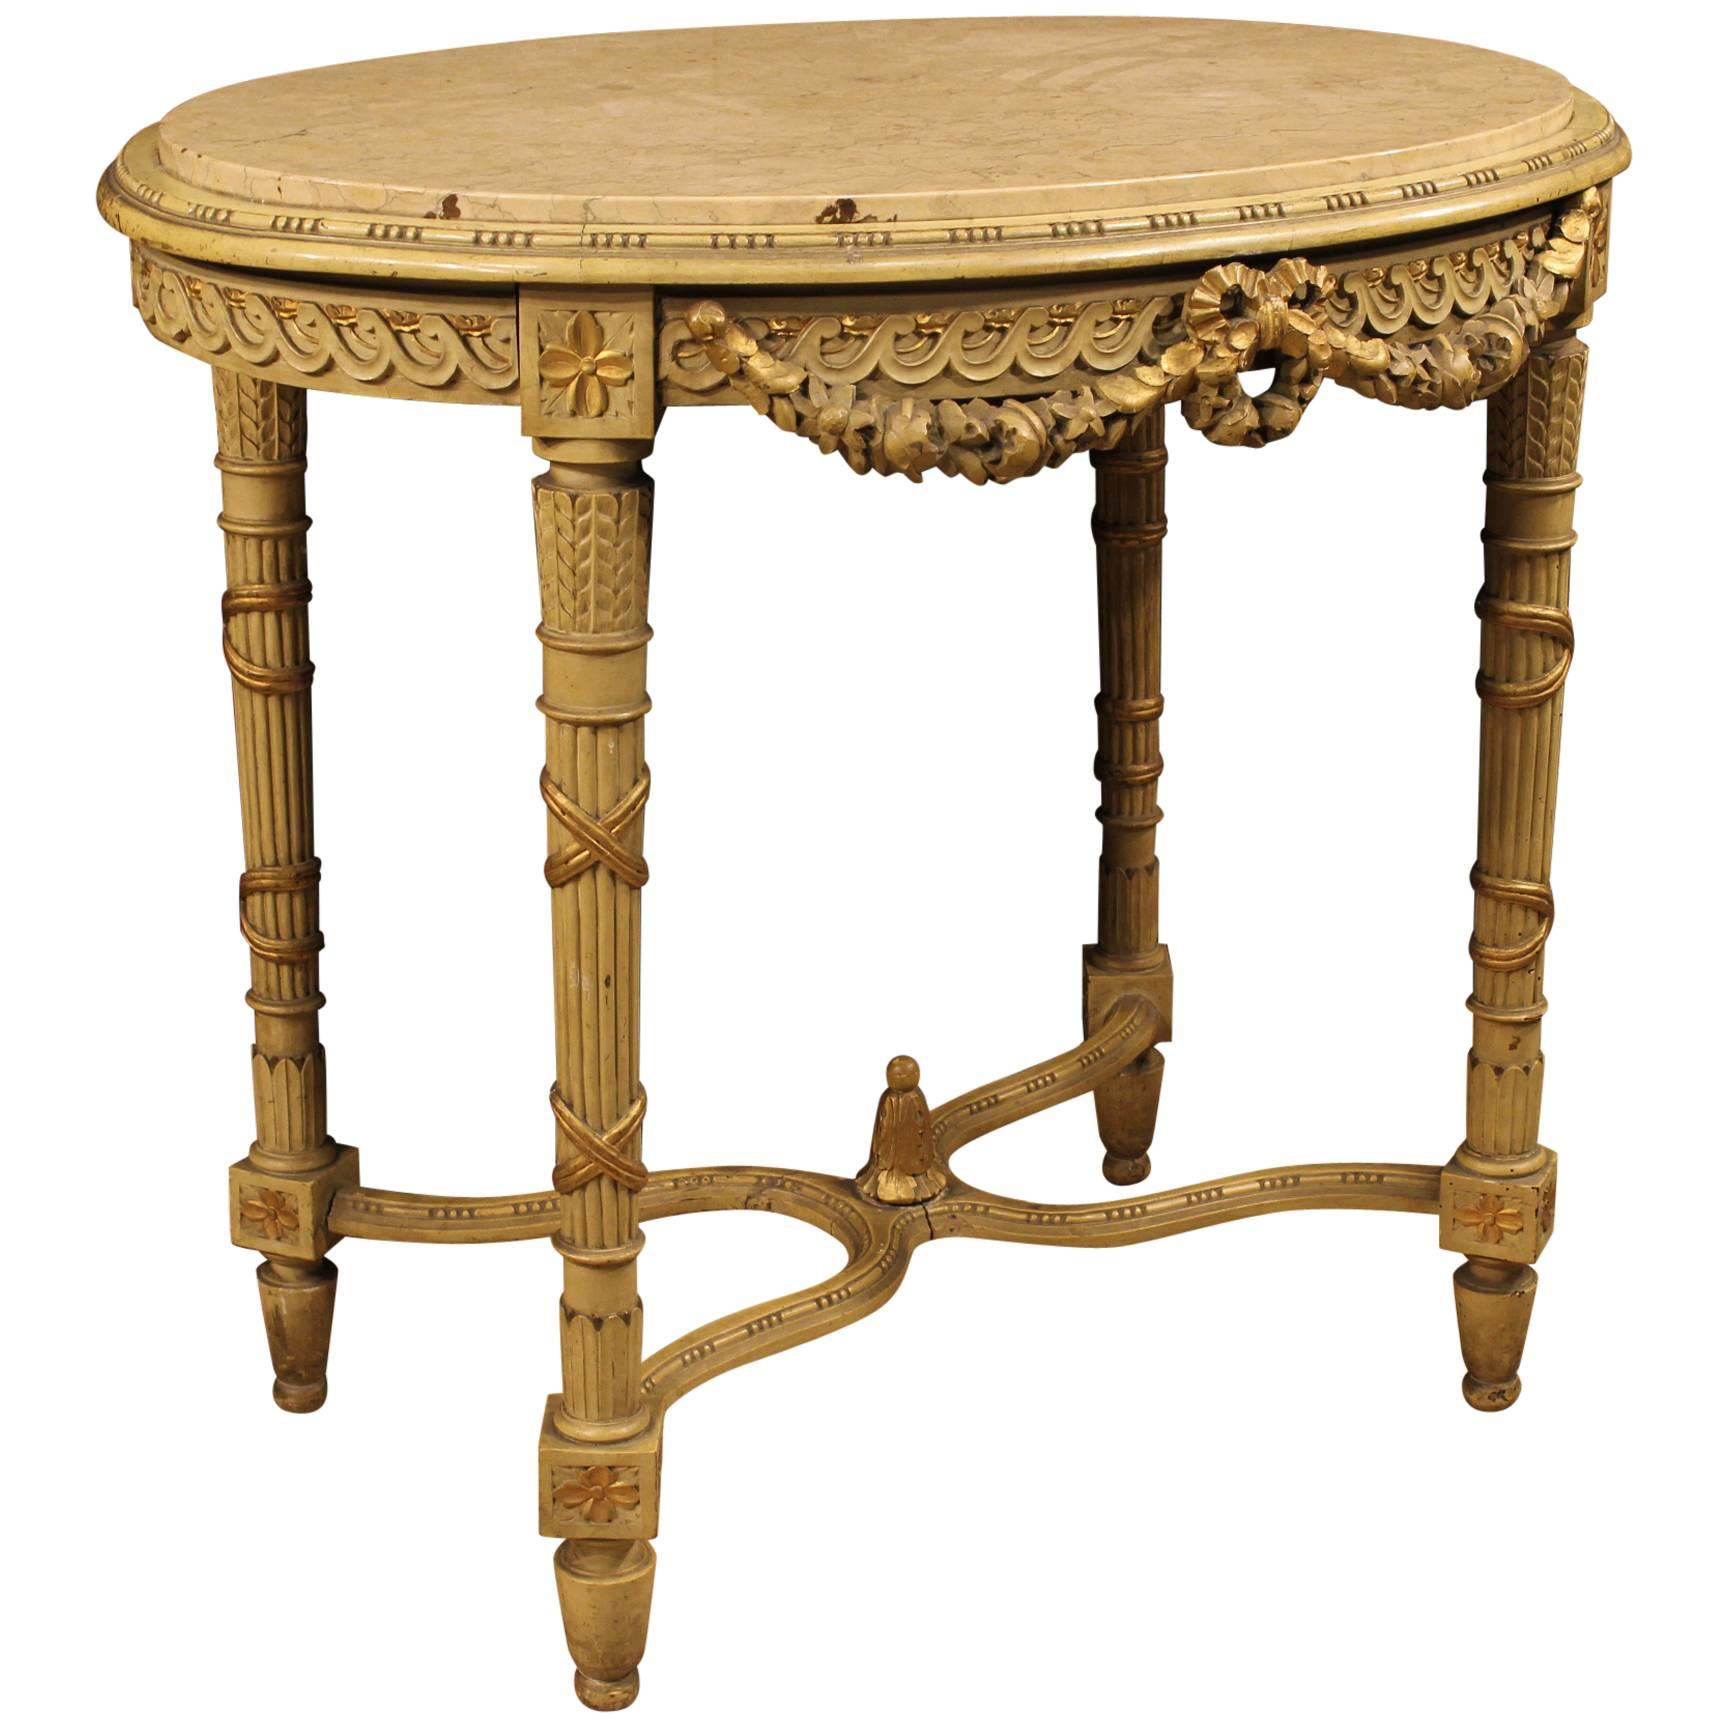 19th Century French Coffee Table in Louis XVI Style